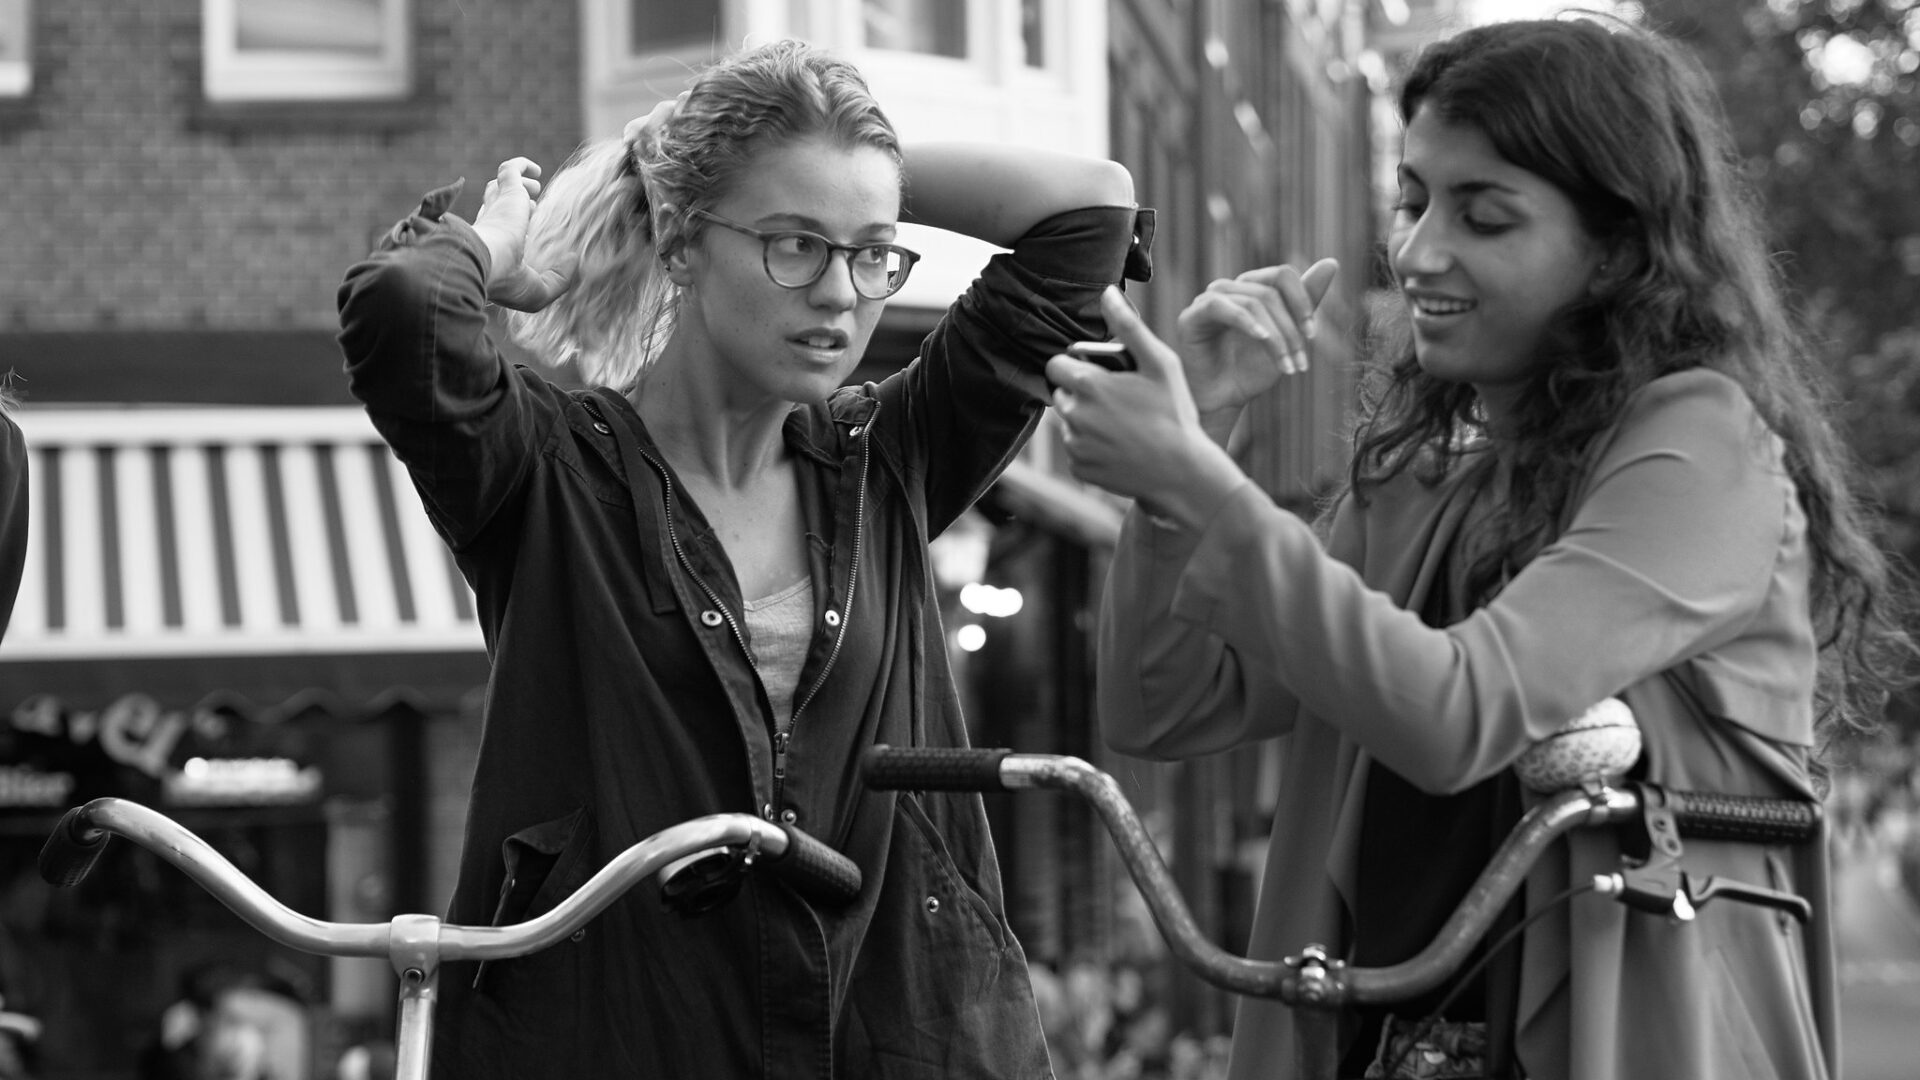 Two women stand with their bikes, one is signing and the other is putting up her hair.